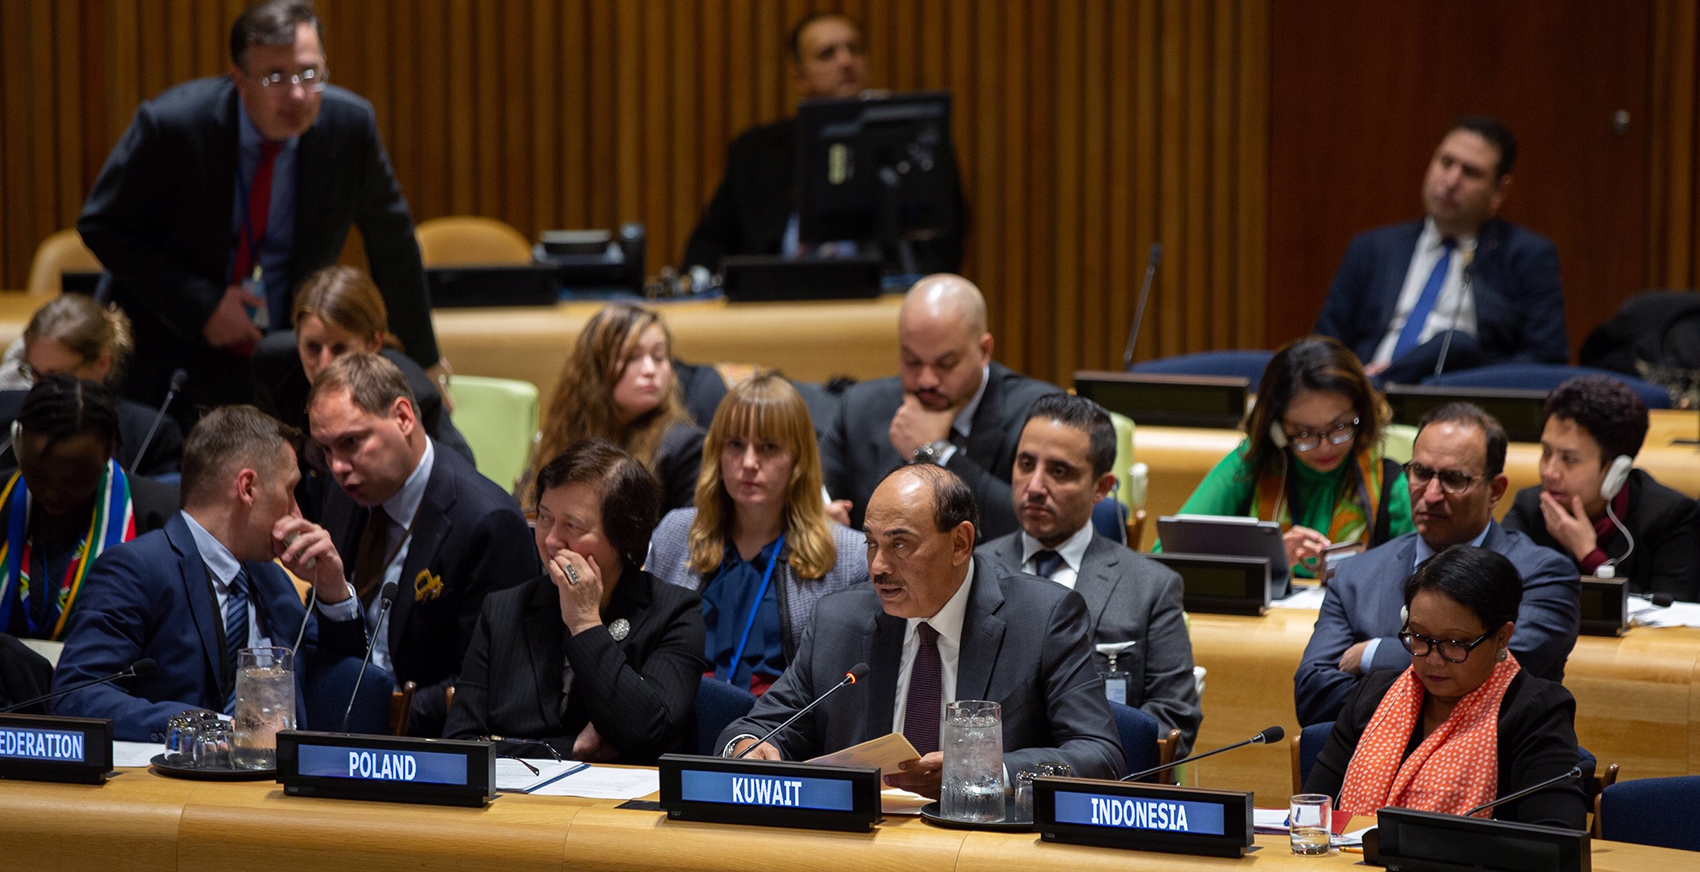 Deputy Prime Minister and Minister of Foreign Affairs Sheikh Sabah Khaled Al-Hamad Al-Sabah addresses the UN Security Council session on the potential of national action plans for advancing Women